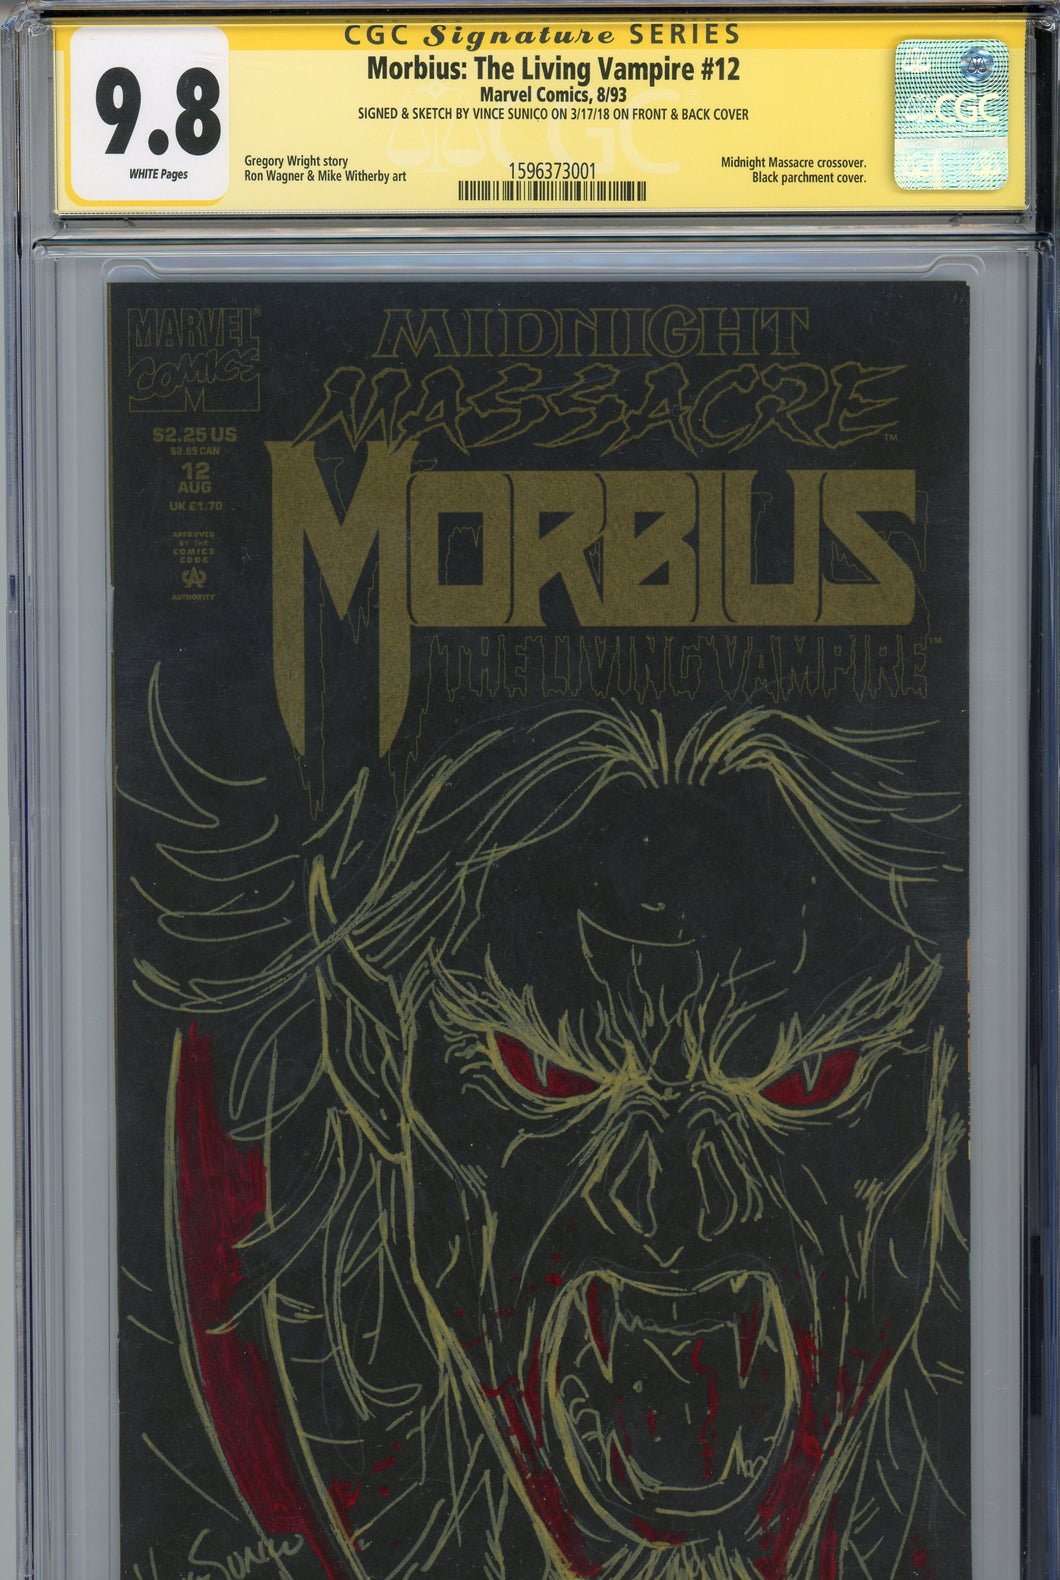 Morbius: The Living Vampire #12 CGC 9.8 SS Sketched on Both Covers